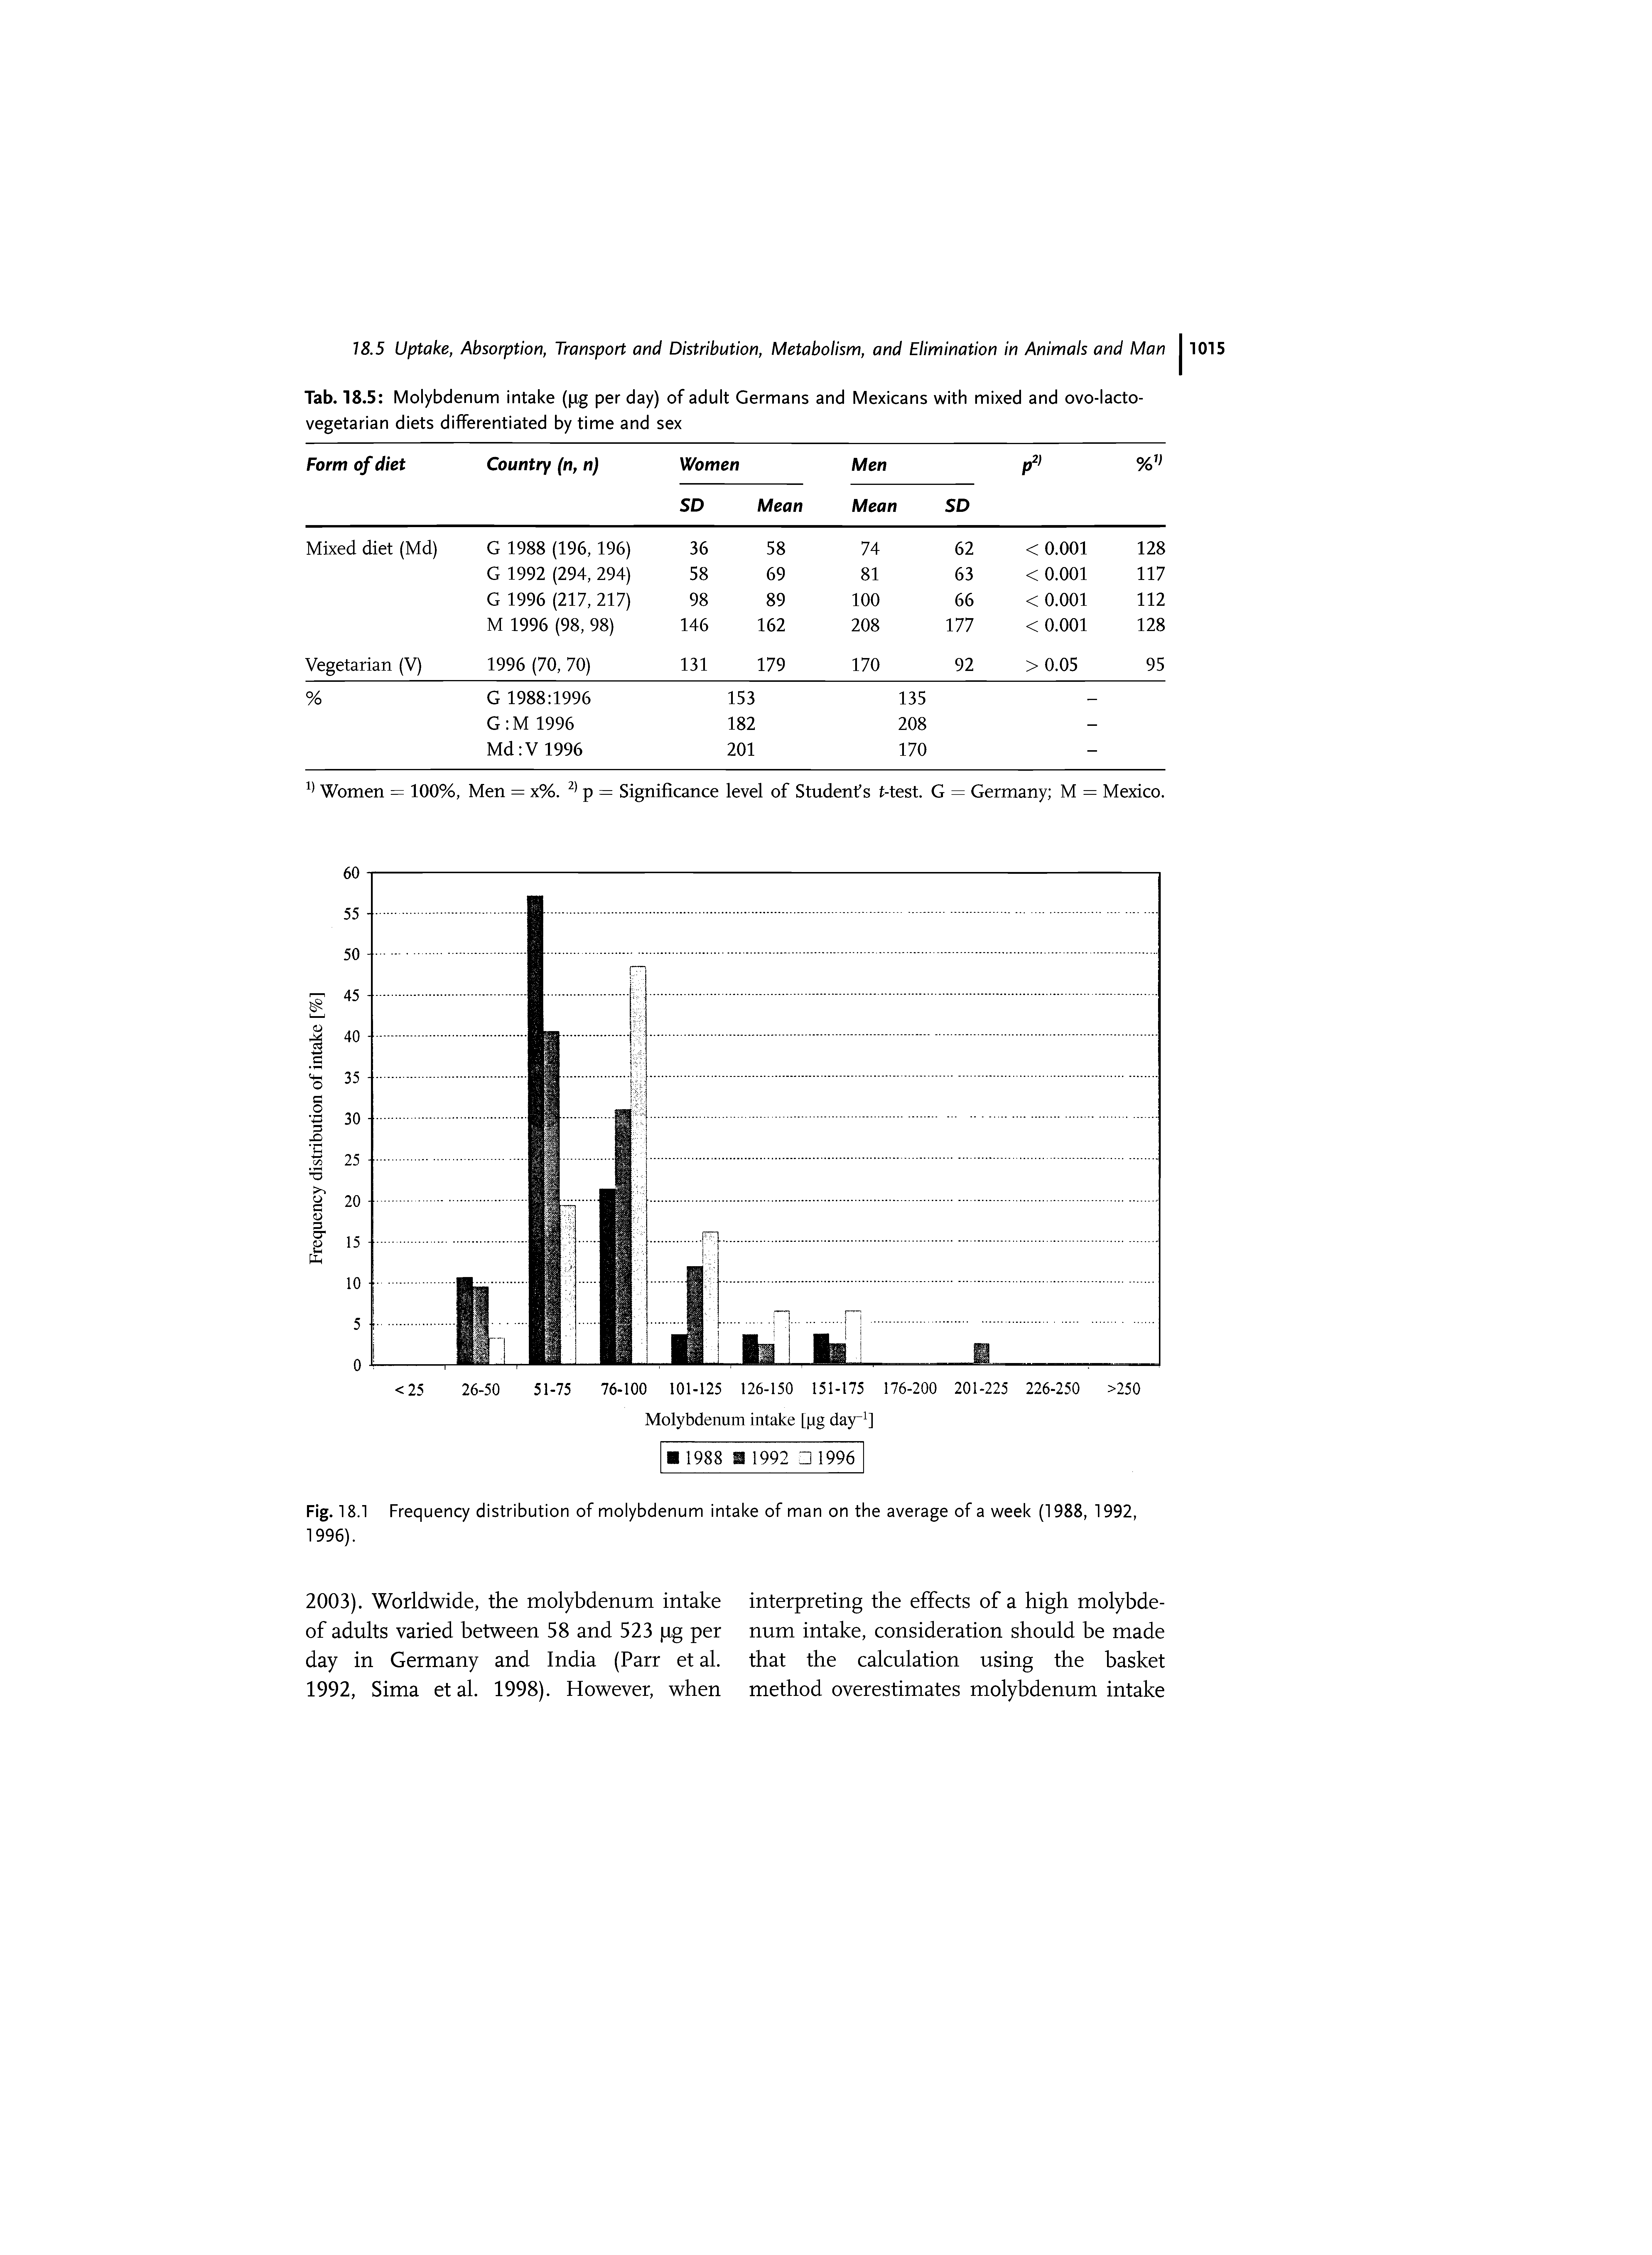 Tab. 18.5 Molybdenum intake ( ig per day) of adult Germans and Mexicans with mixed and ovo-lacto-vegetarian diets differentiated by time and sex...